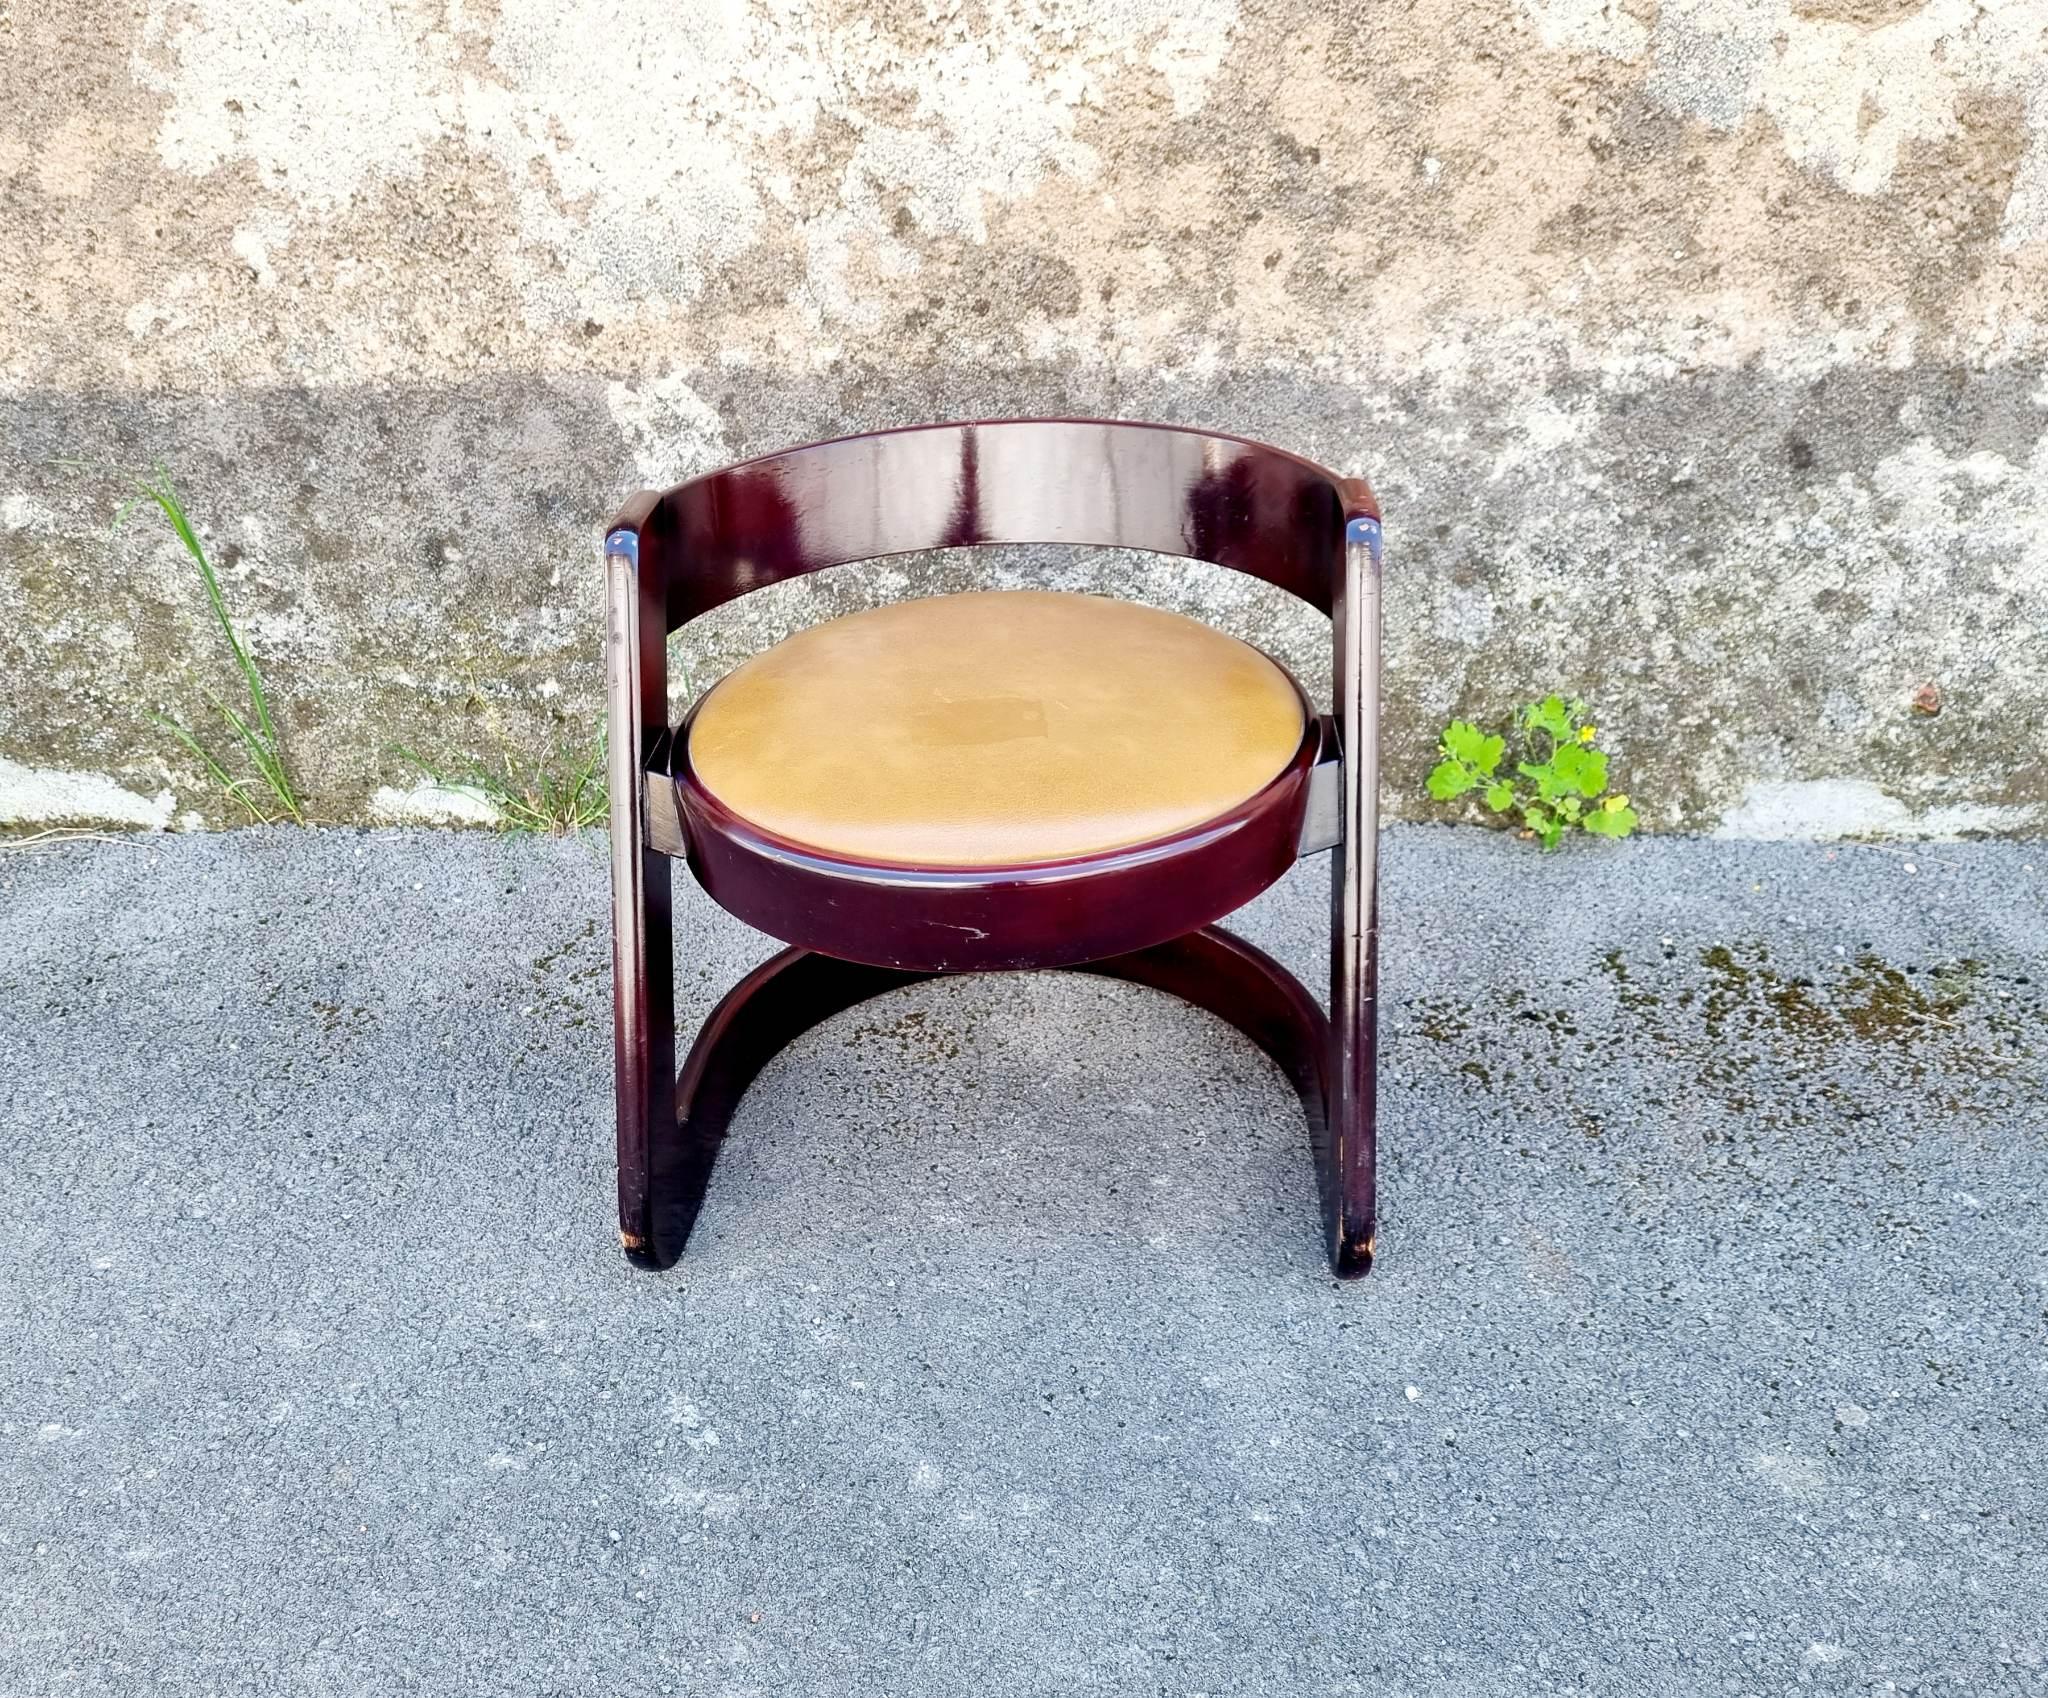 Rare Midcentury Stool Produced by Mario Sabot, Italy 70s For Sale 3